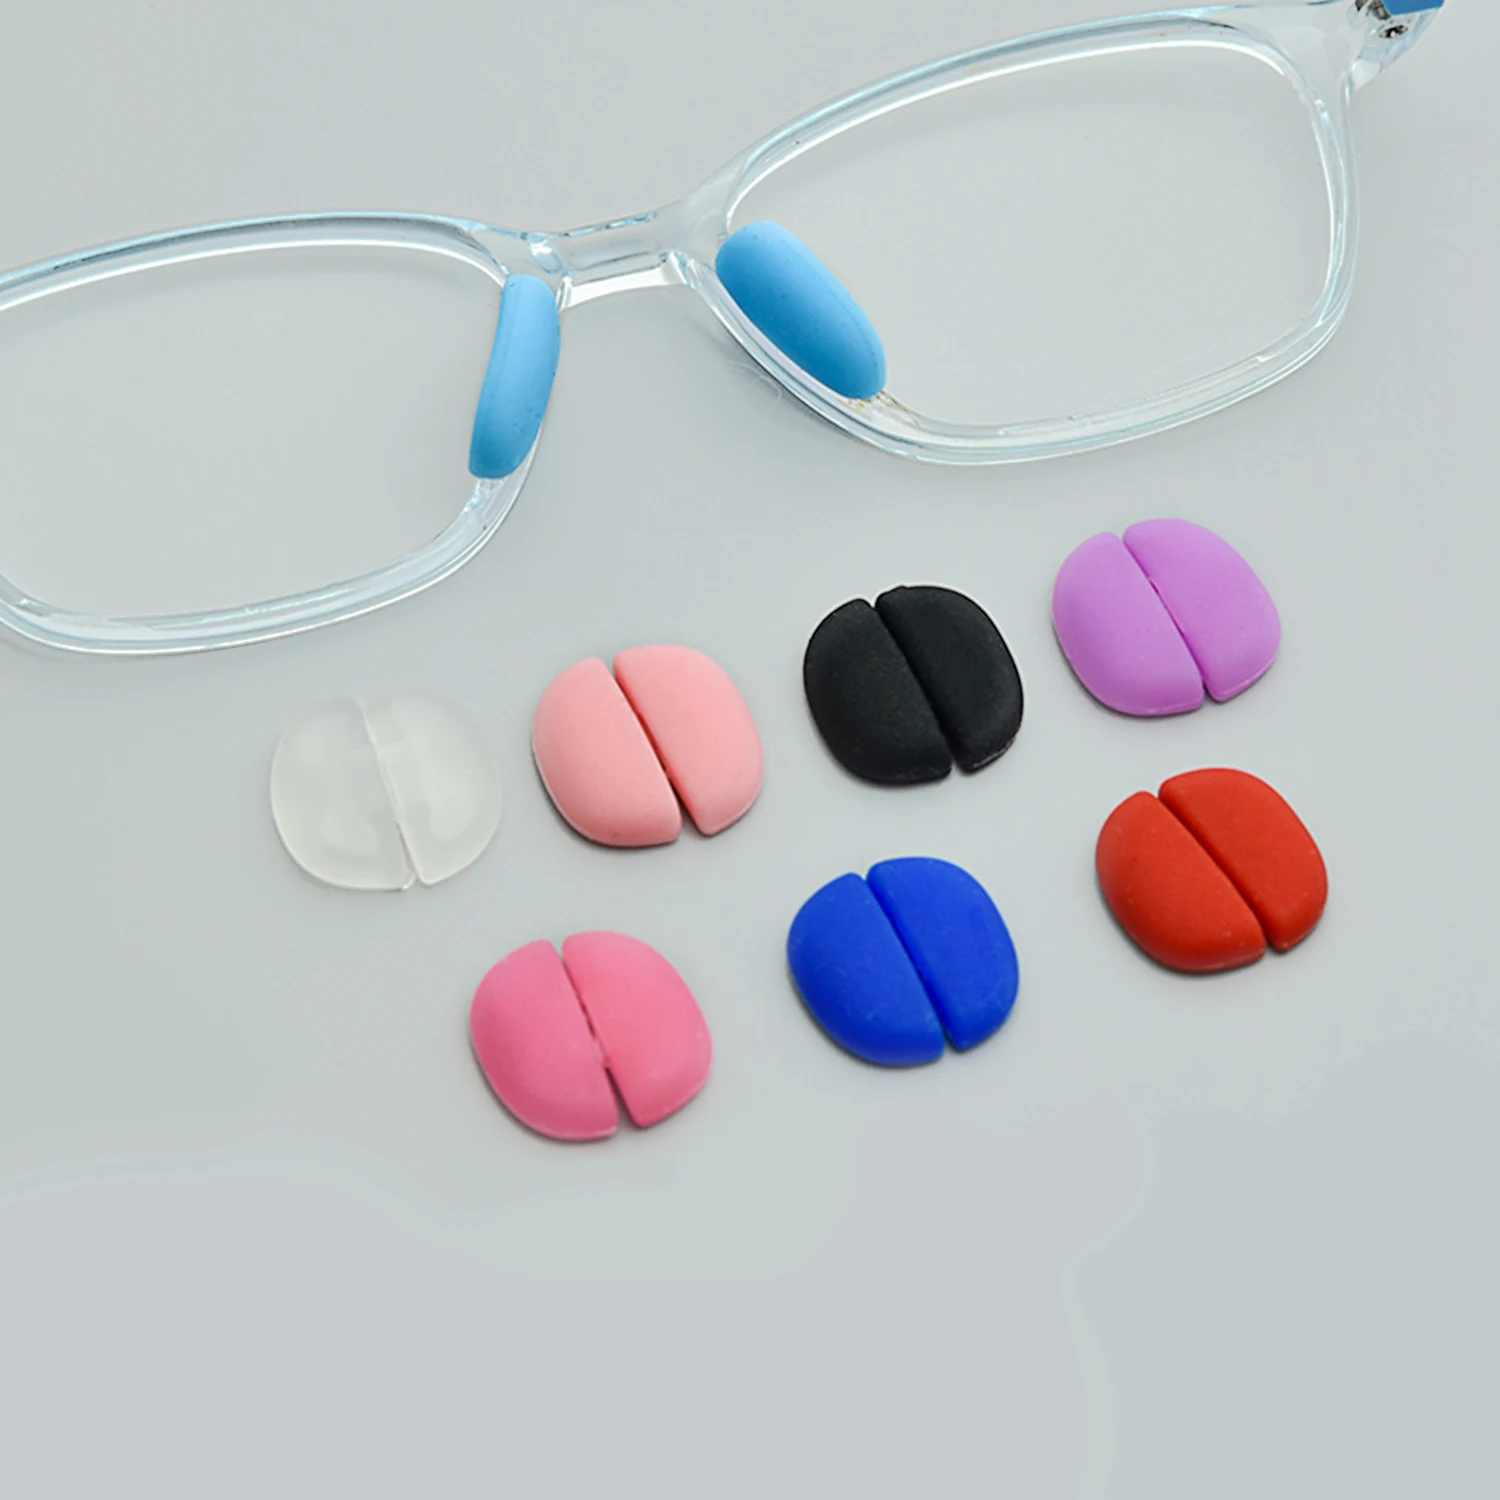 New Arrival 1 Pair Anti-slip Silicone Nose Pads For Eyeglasses Glasses Frame Stick On Nose Pad Eyewear Accessories-animated-img